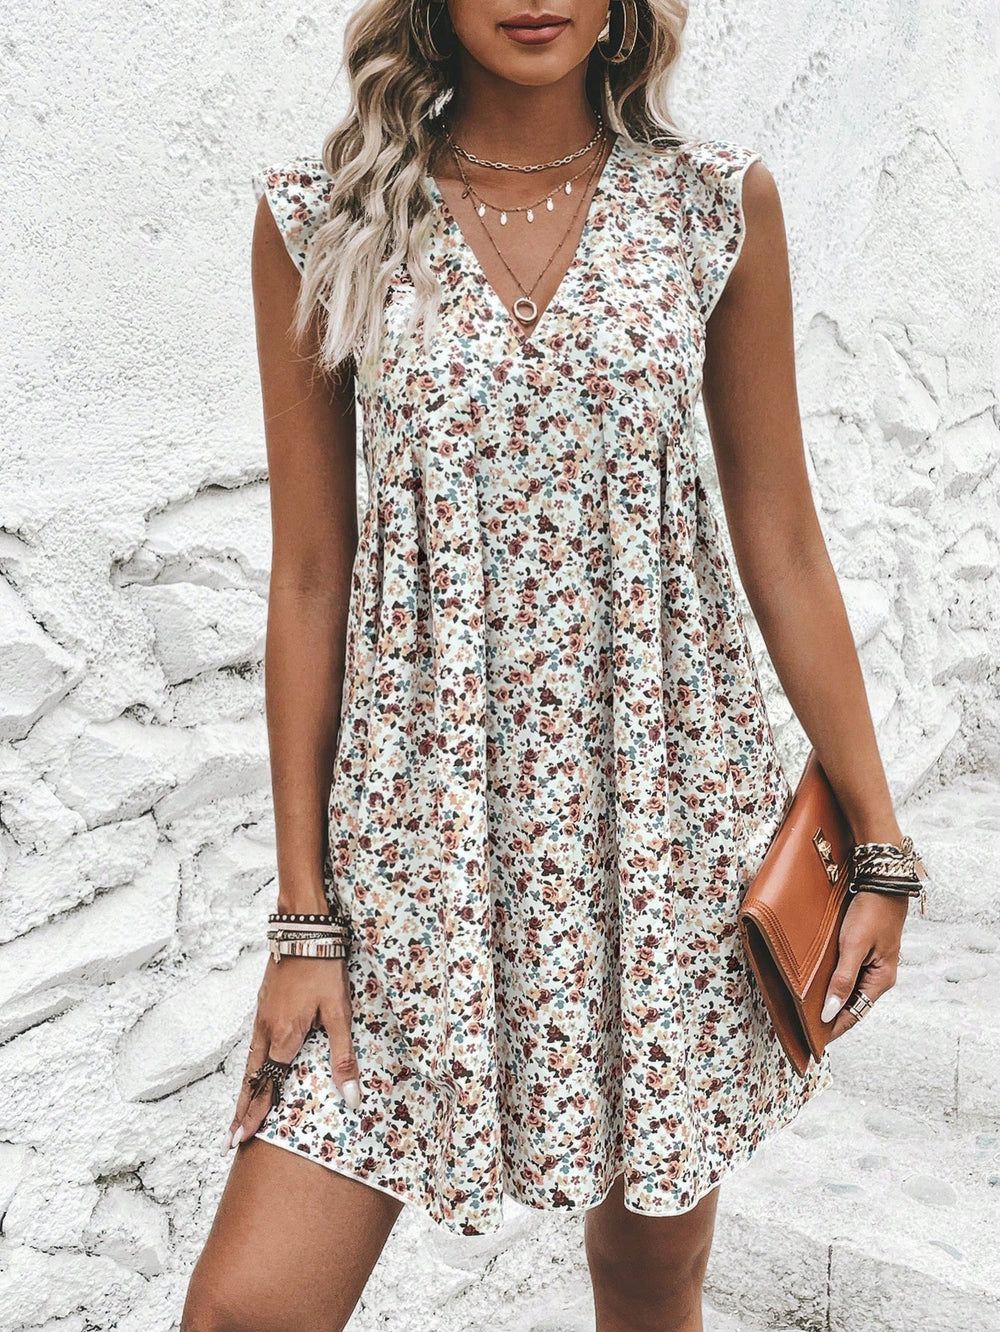 Dresses - Boho Chic, Bohemian Style Women Clothing - Affordable and ...